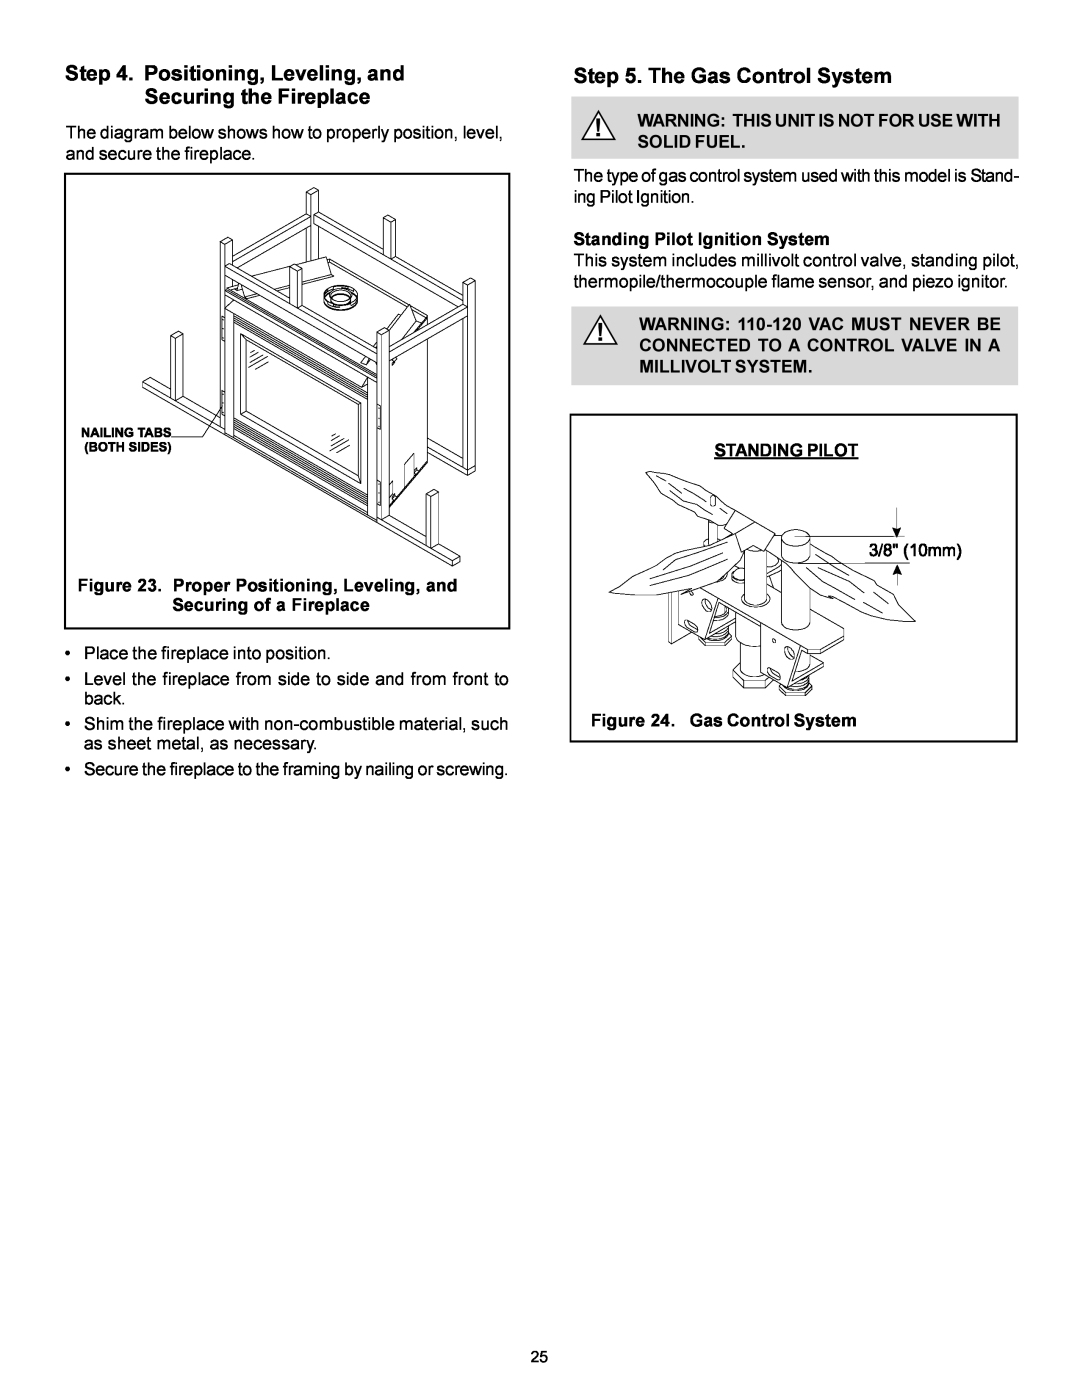 Heat & Glo LifeStyle 7000XLT manual The Gas Control System, Proper Positioning, Leveling, and, Securing of a Fireplace 